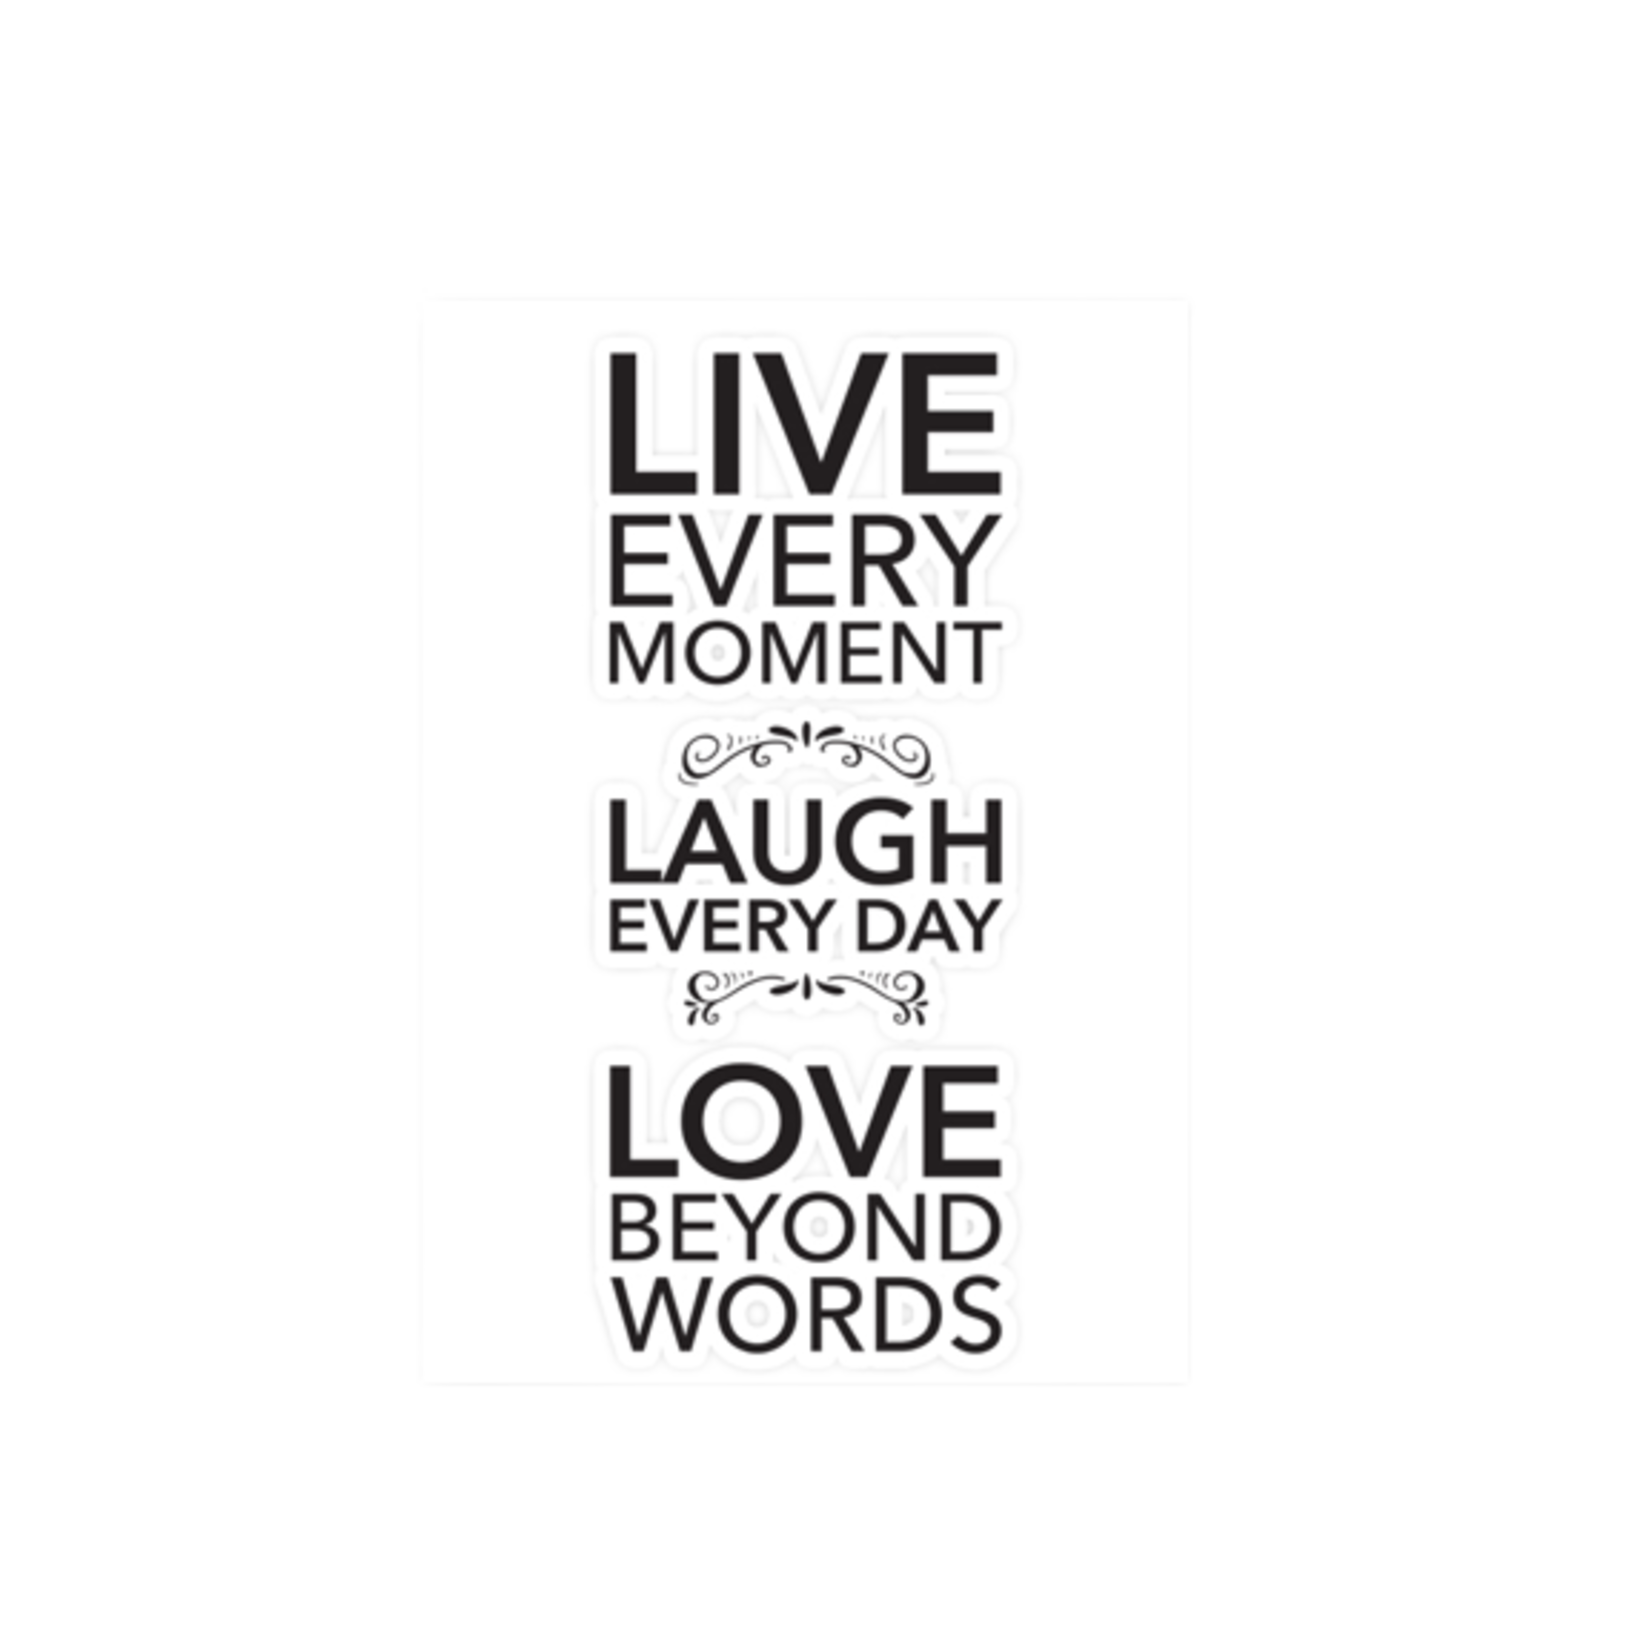 WORDS TO LIVE BY WALL ART - LIVE EVERY MOMENT